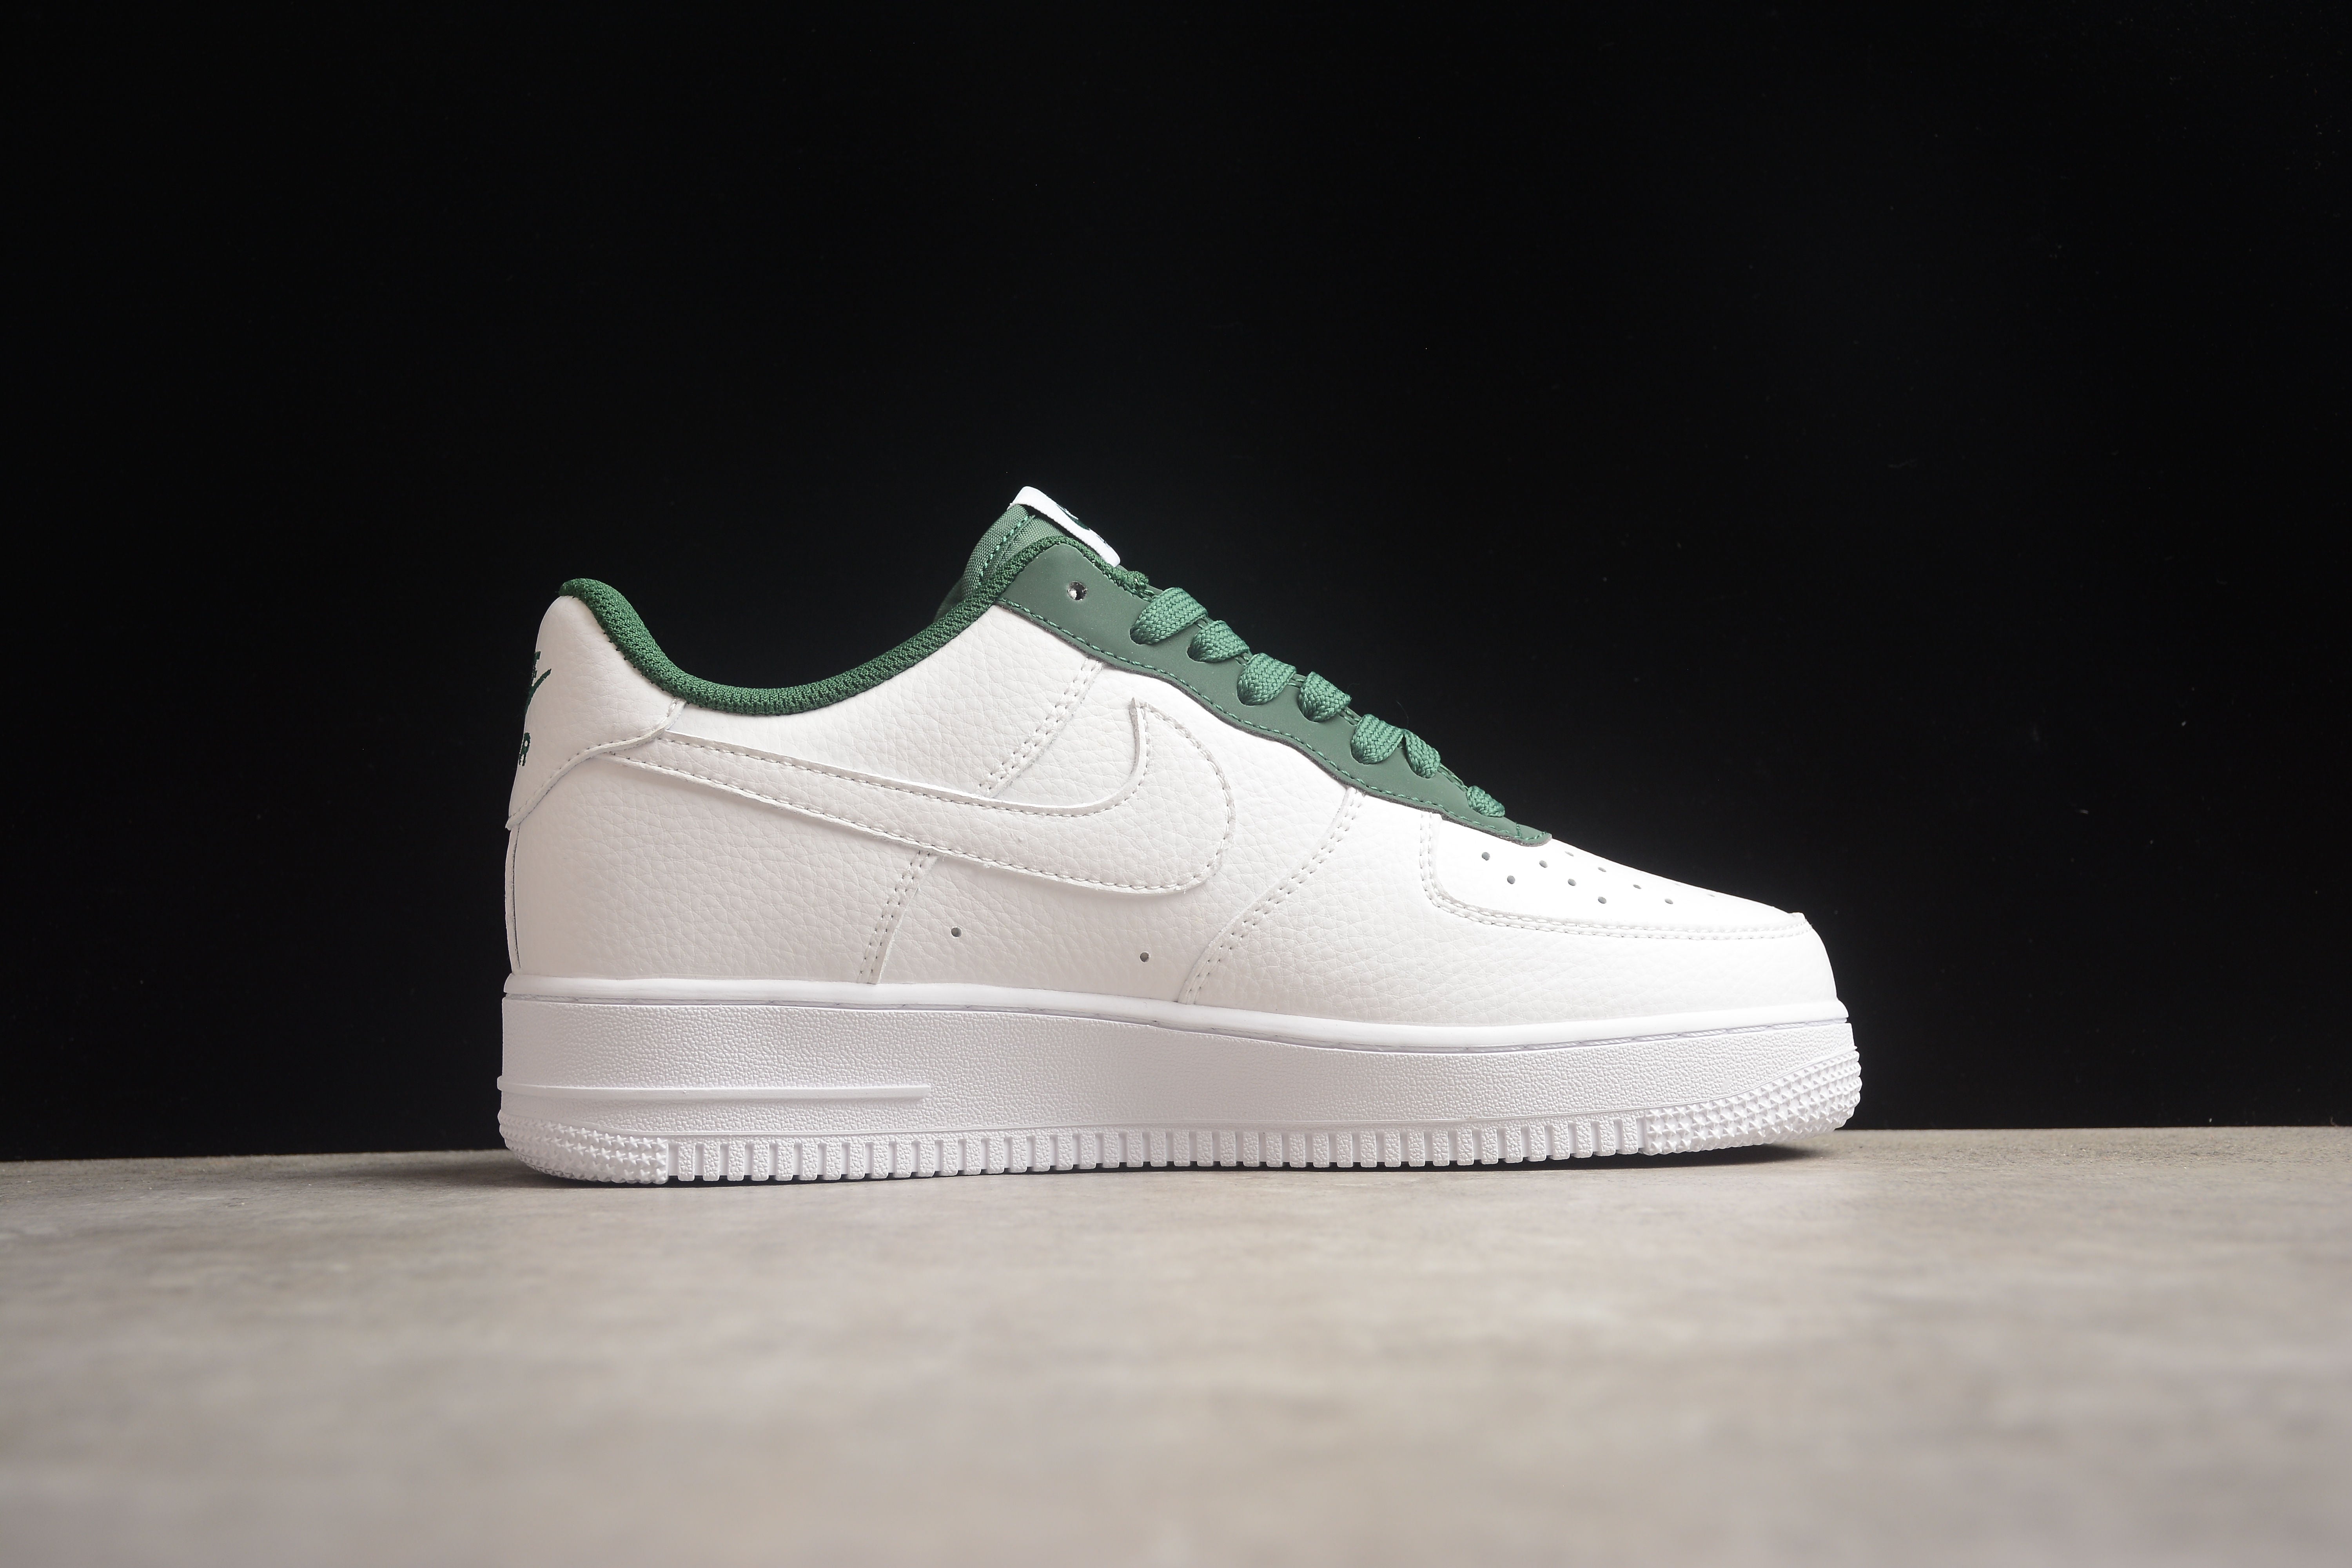 Nike airforce A1 white and olive green shoes